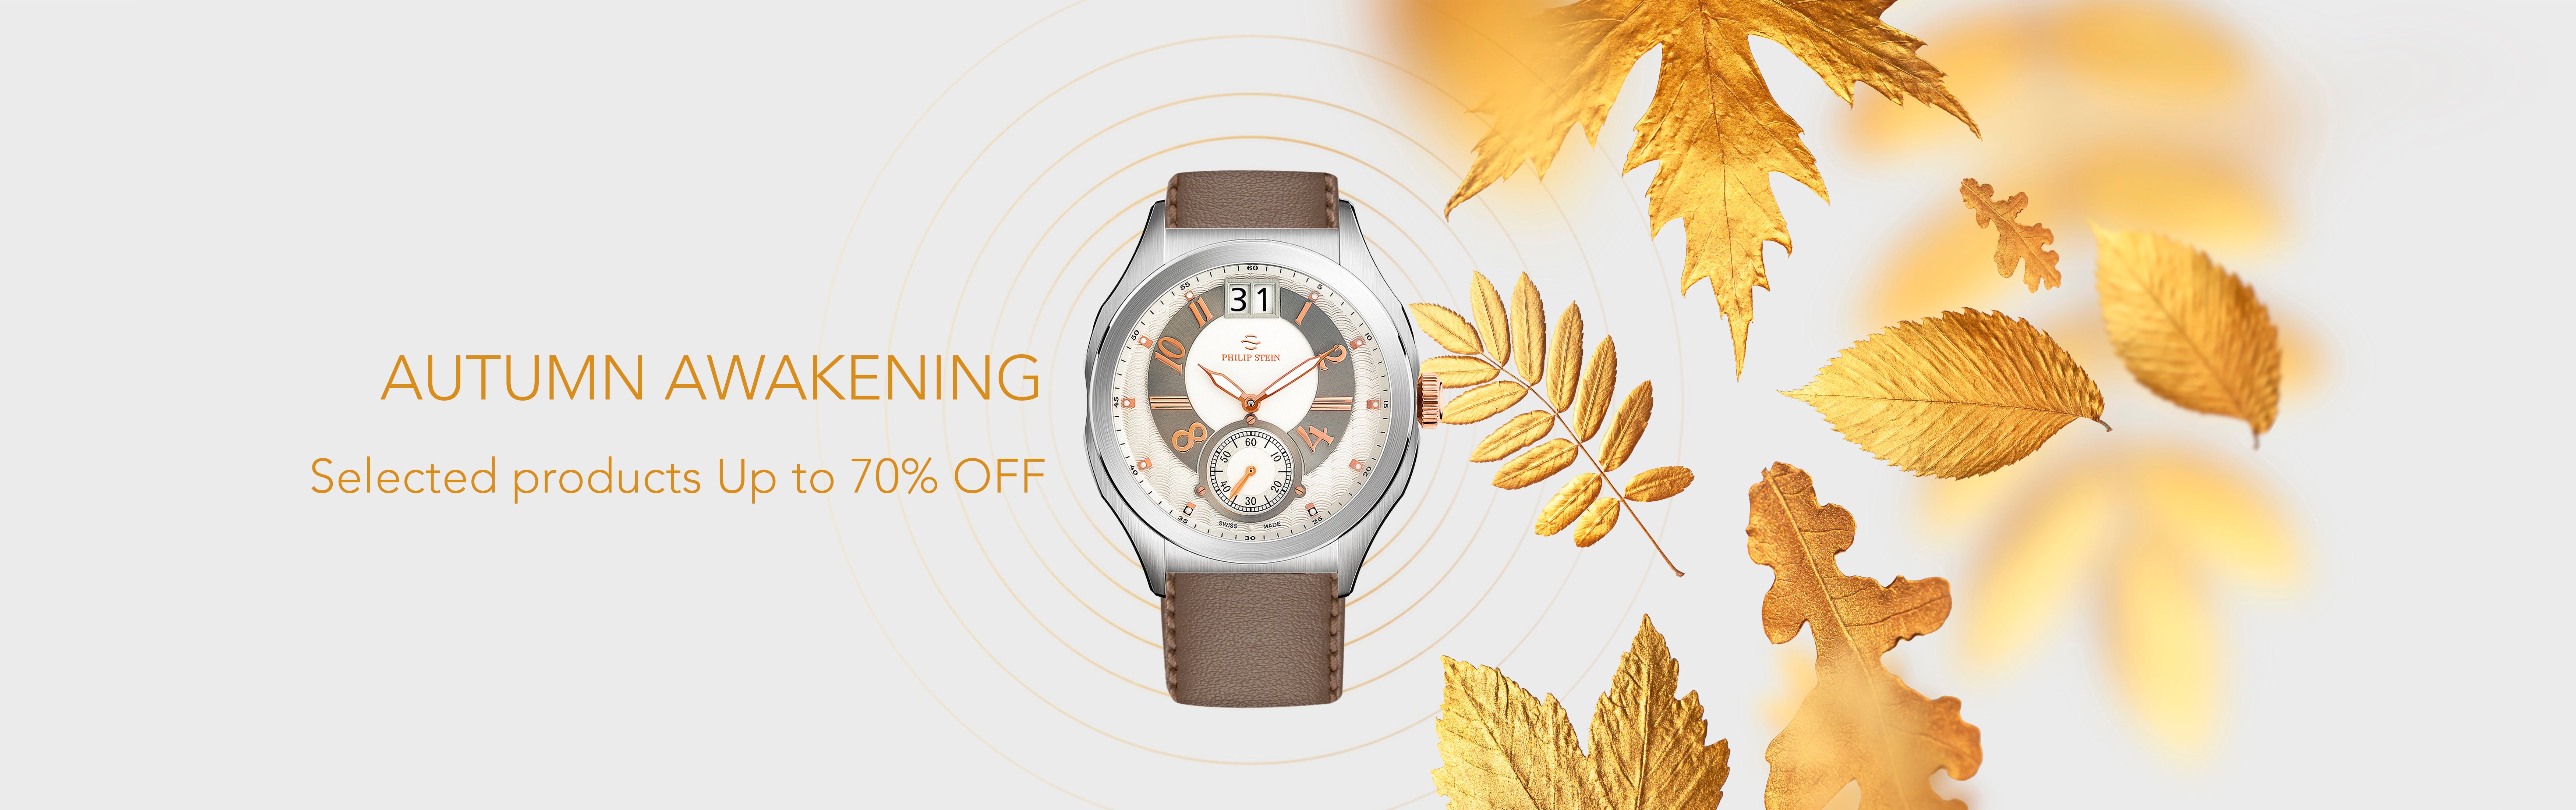 Autumn awakening selected products up to 70% off